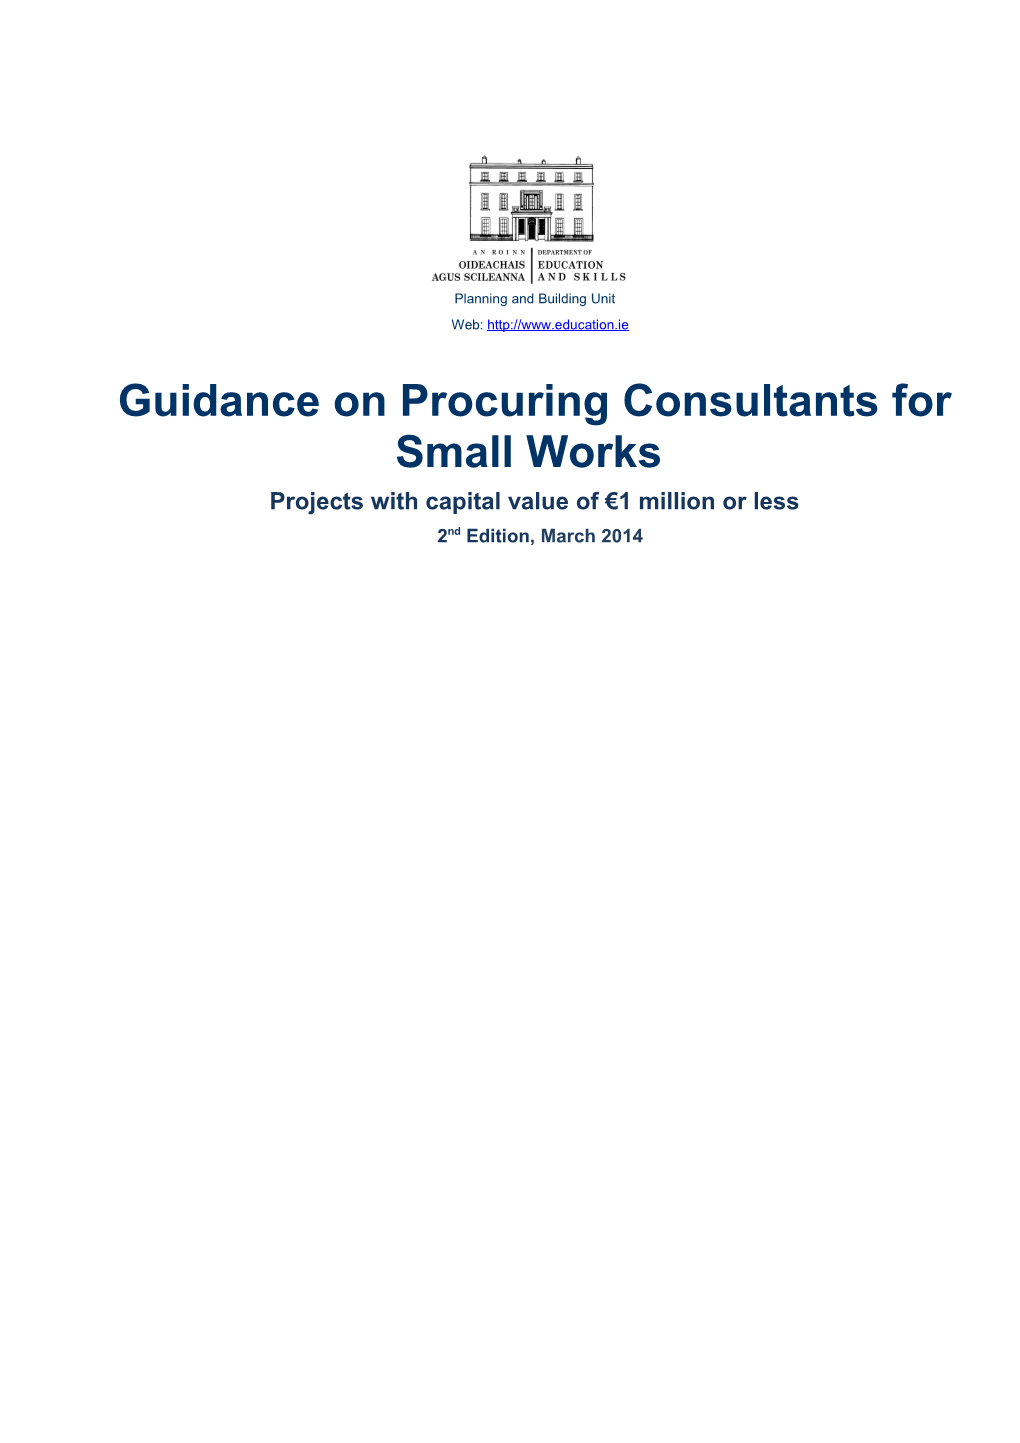 Guidance on Procuring Consultants for Small Works